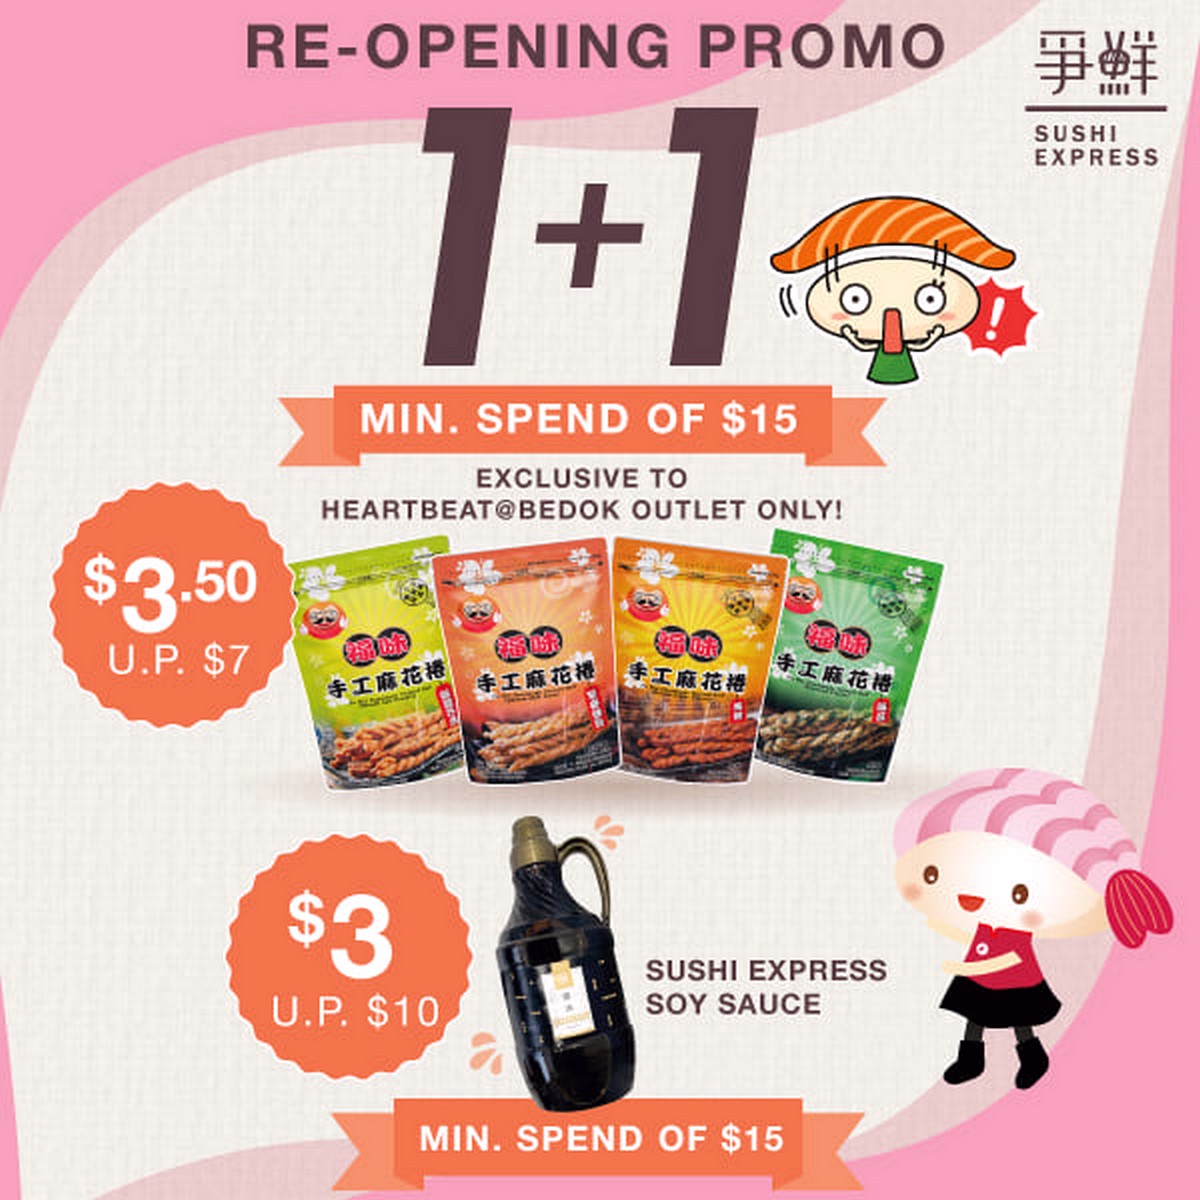 Sushi-Express-FREE-1-Plate-of-Sushi-2021-Singapore-Japanese-Food-Promotion-004 19-23 Apr 2021: Sushi Express Re-Opening Special Promotion at Heartbeat @ Bedok